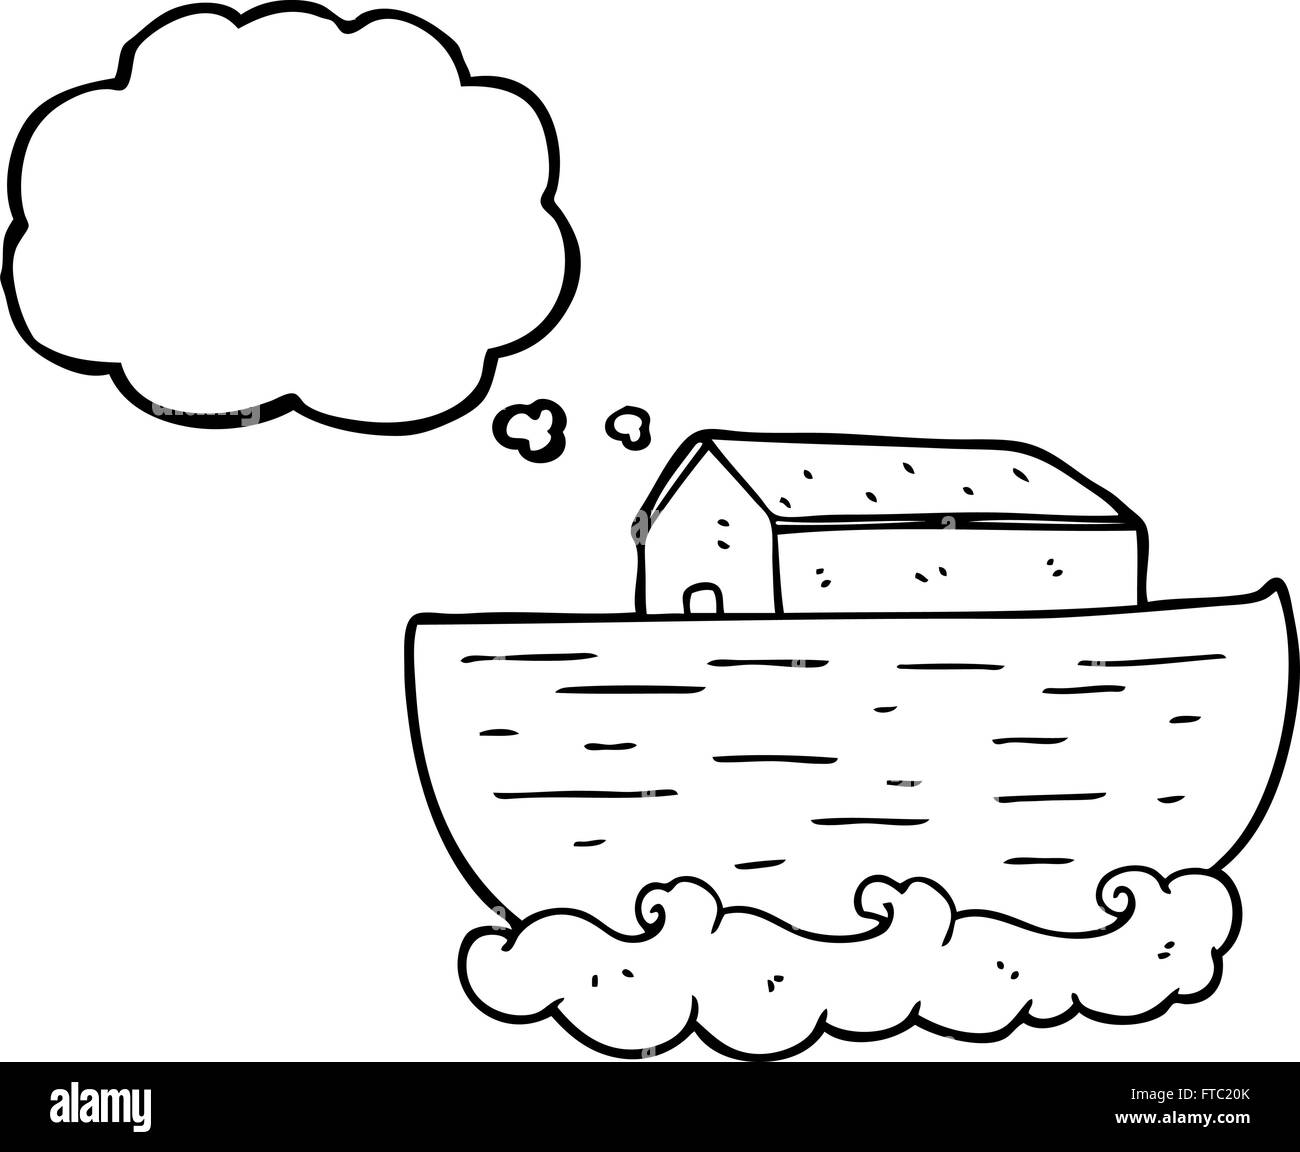 Freehand Drawn Thought Bubble Cartoon Noah S Ark Stock Vector Image Art Alamy